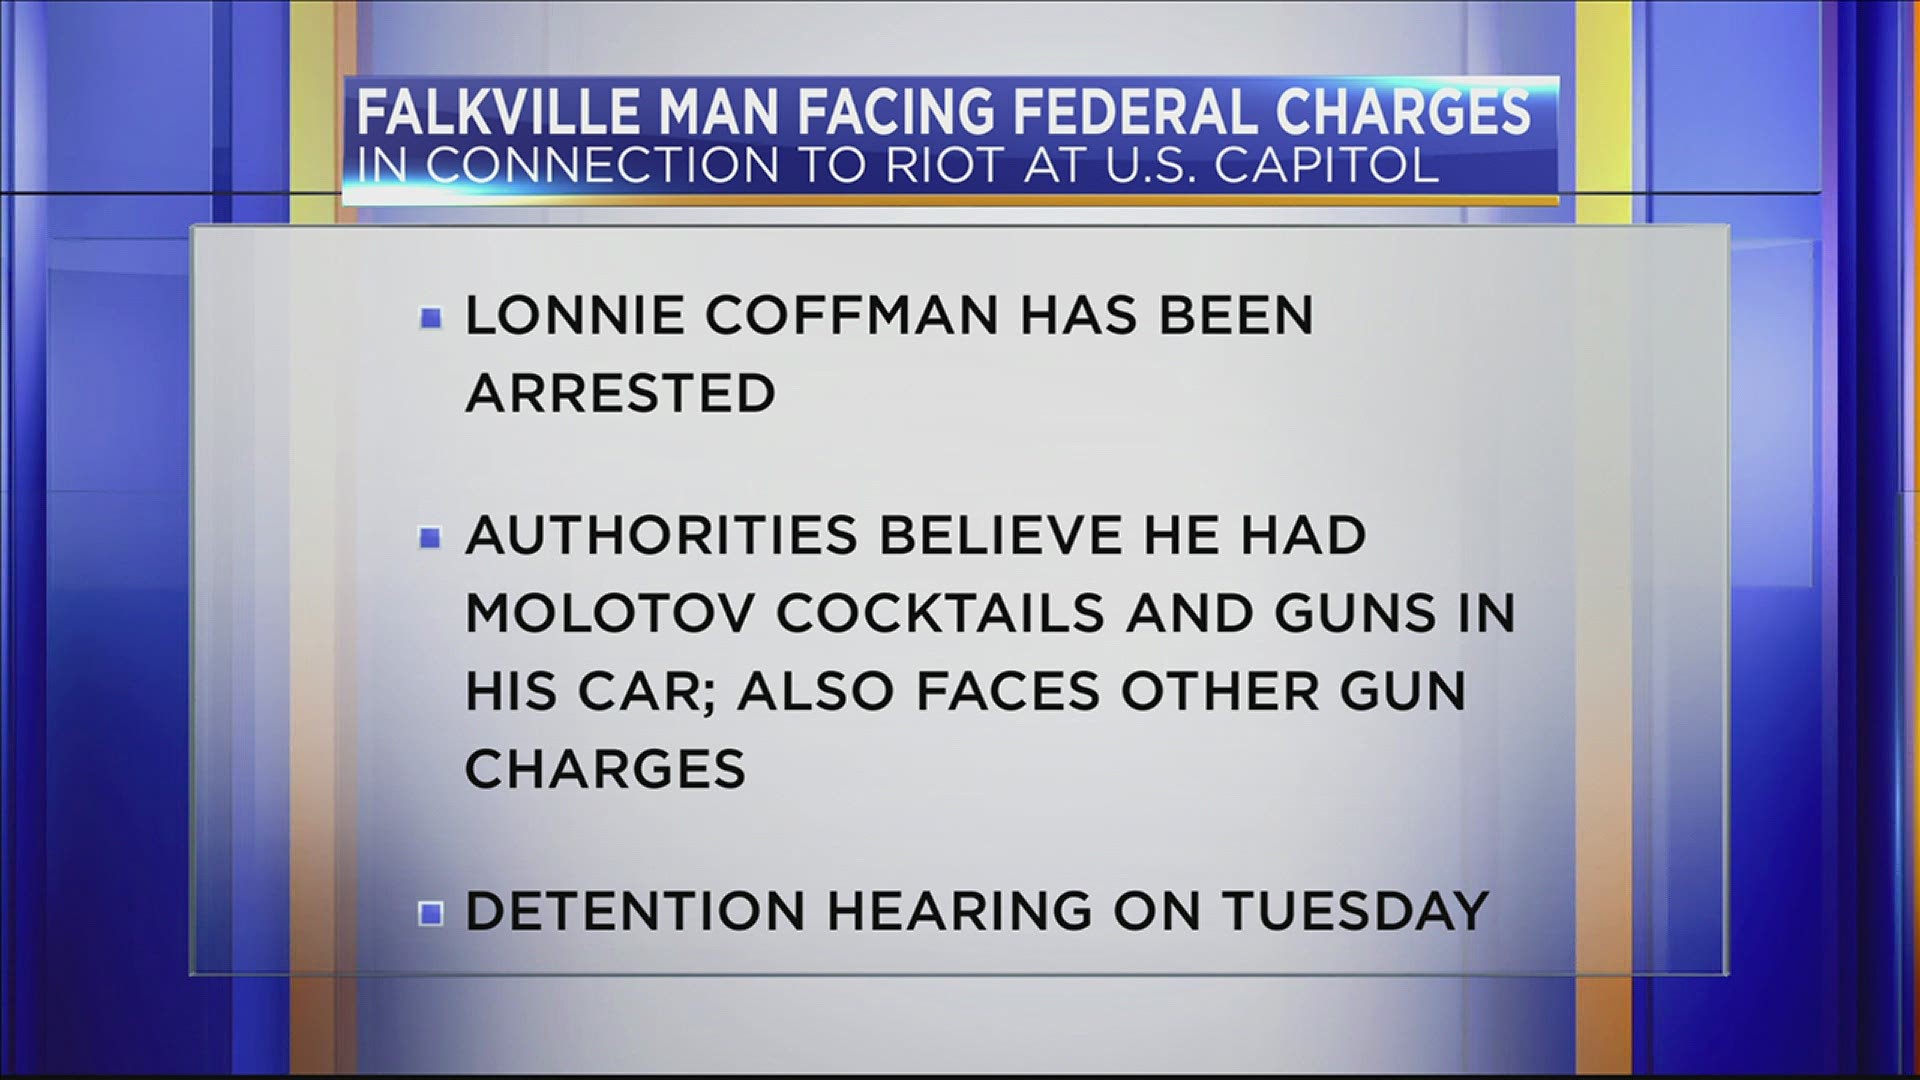 Lonnie Coffman faces federal charges after the breach of the Capitol in Washington D.C.